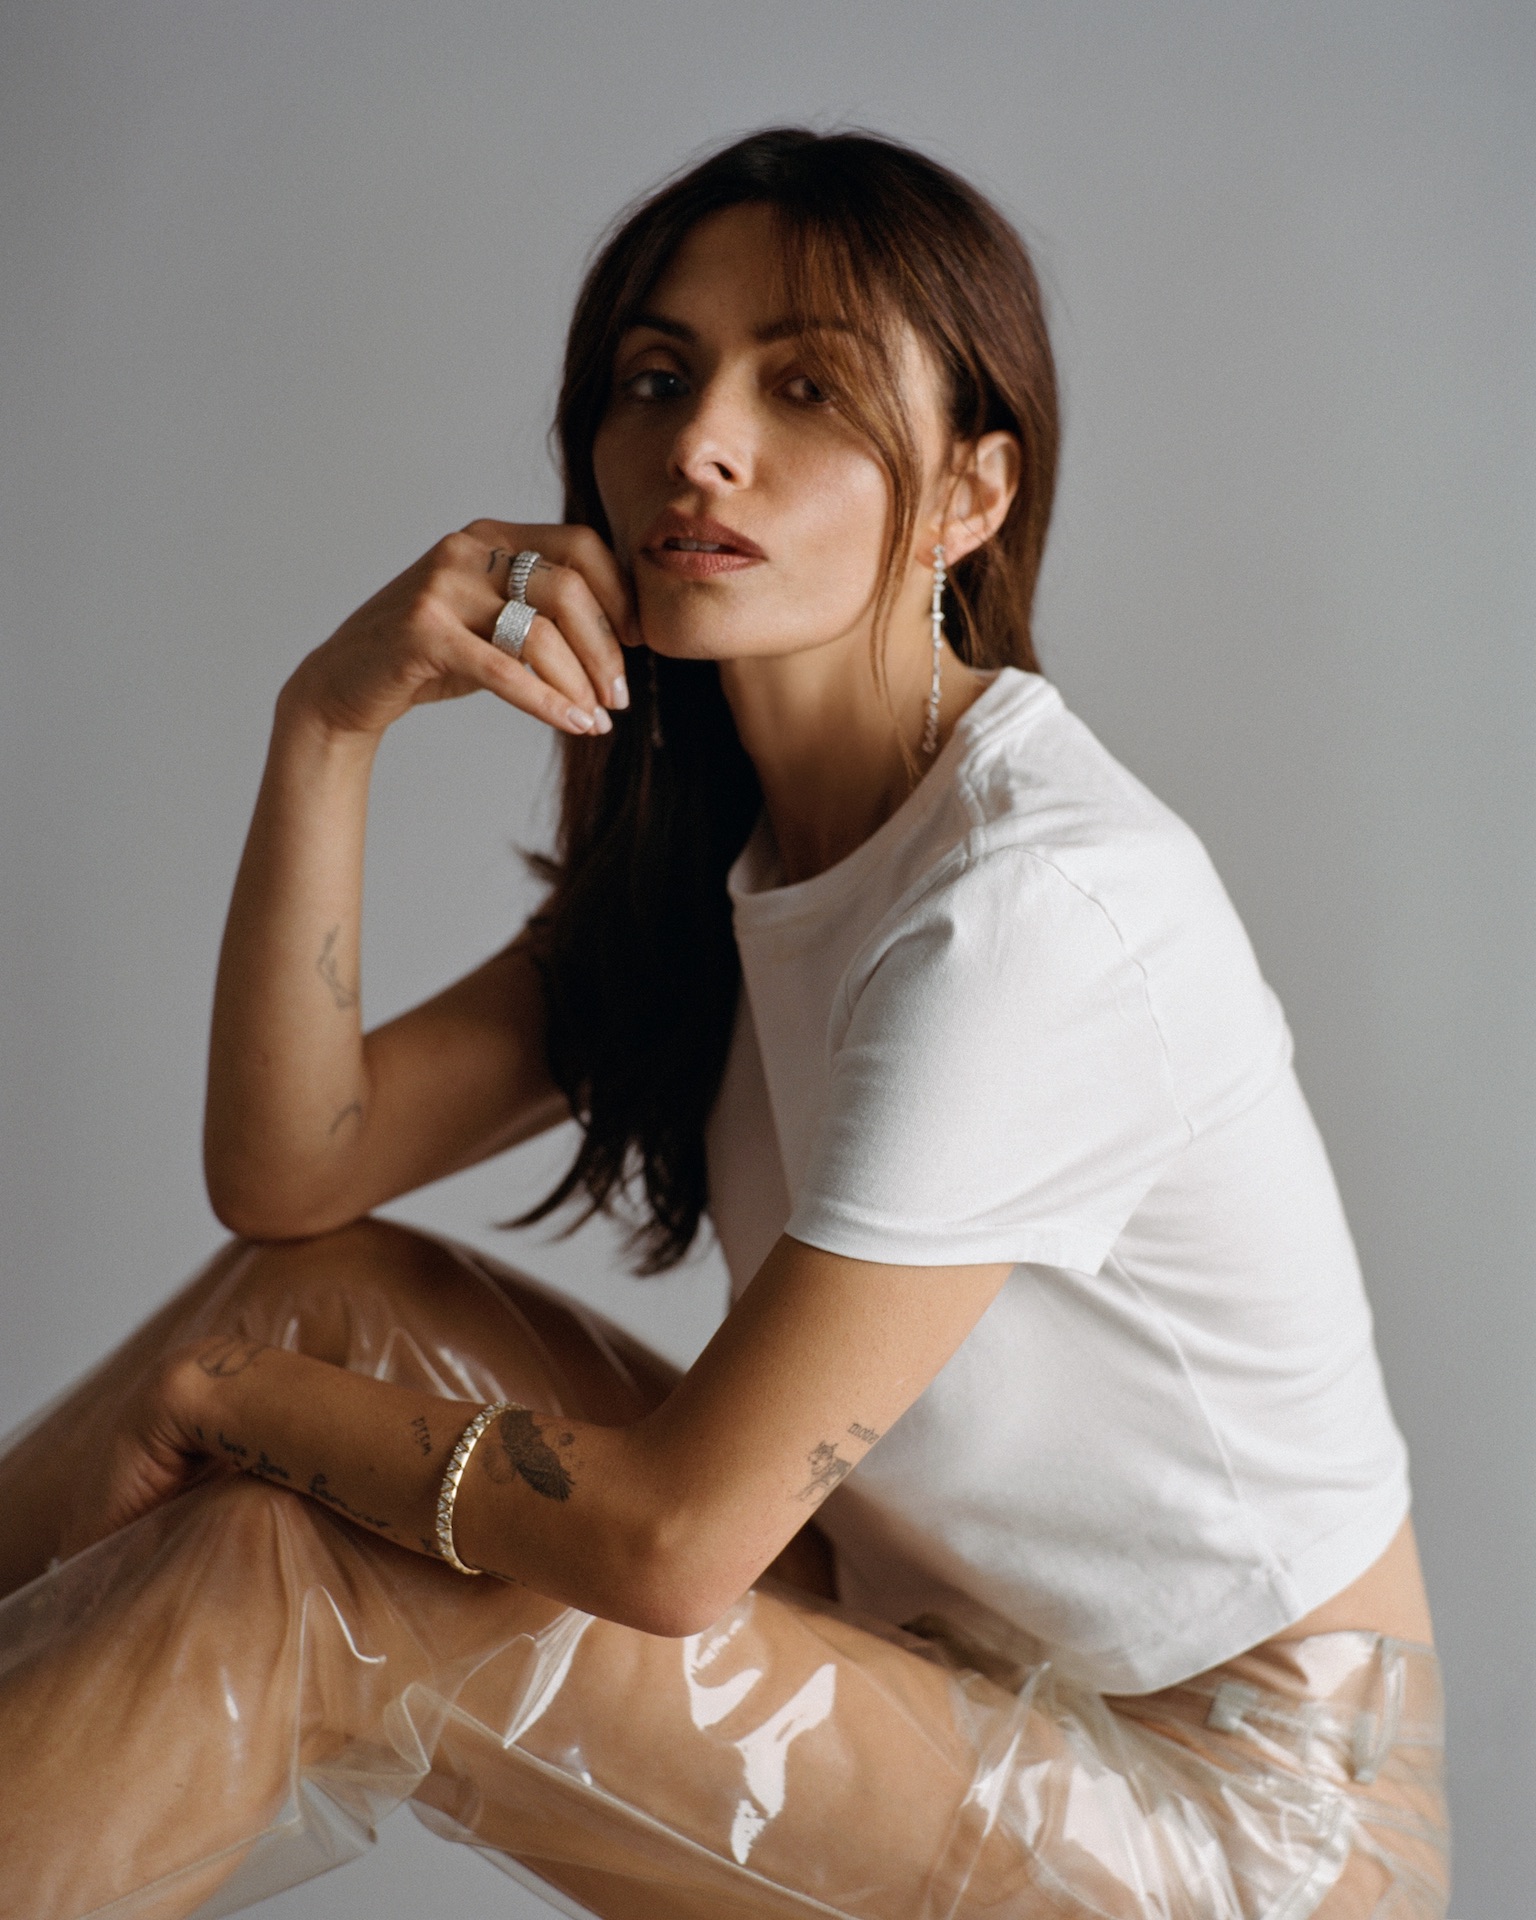 When it comes to her career ambitions and natural diamonds, Sex/Life actress Sarah Shahi is going big or going home.